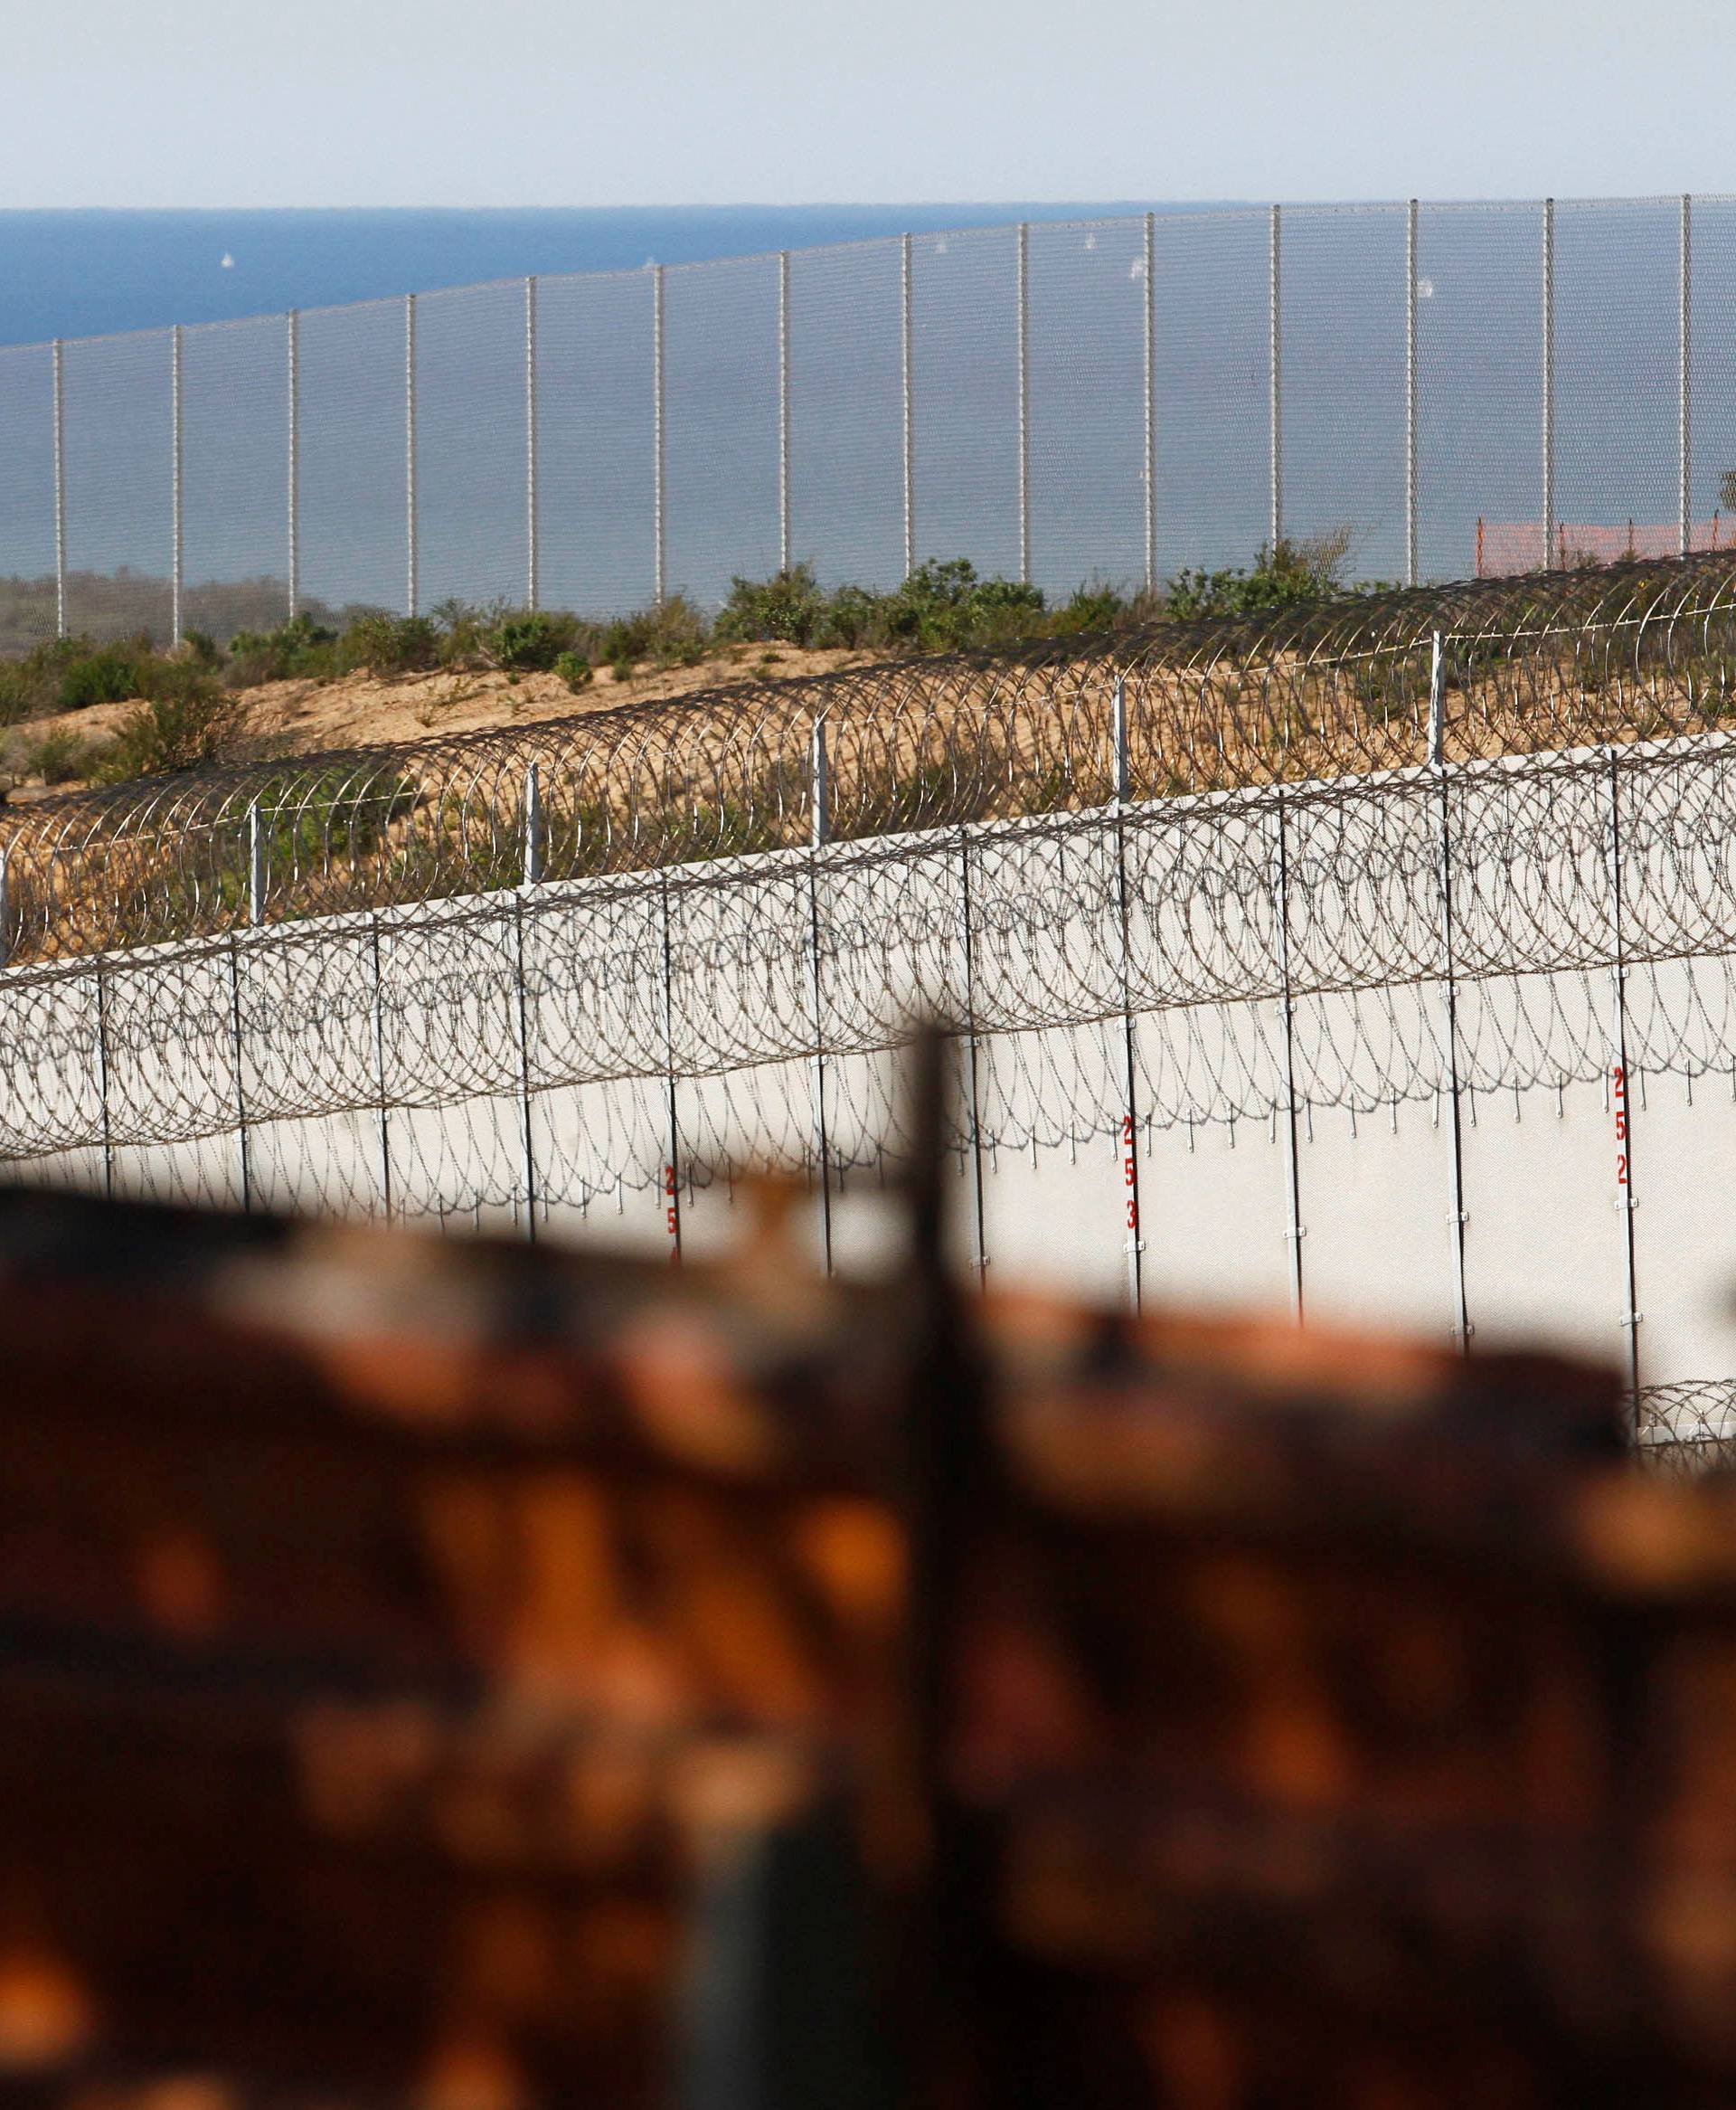 A section of the wall separating Mexico and the United States is seen, in Tijuana